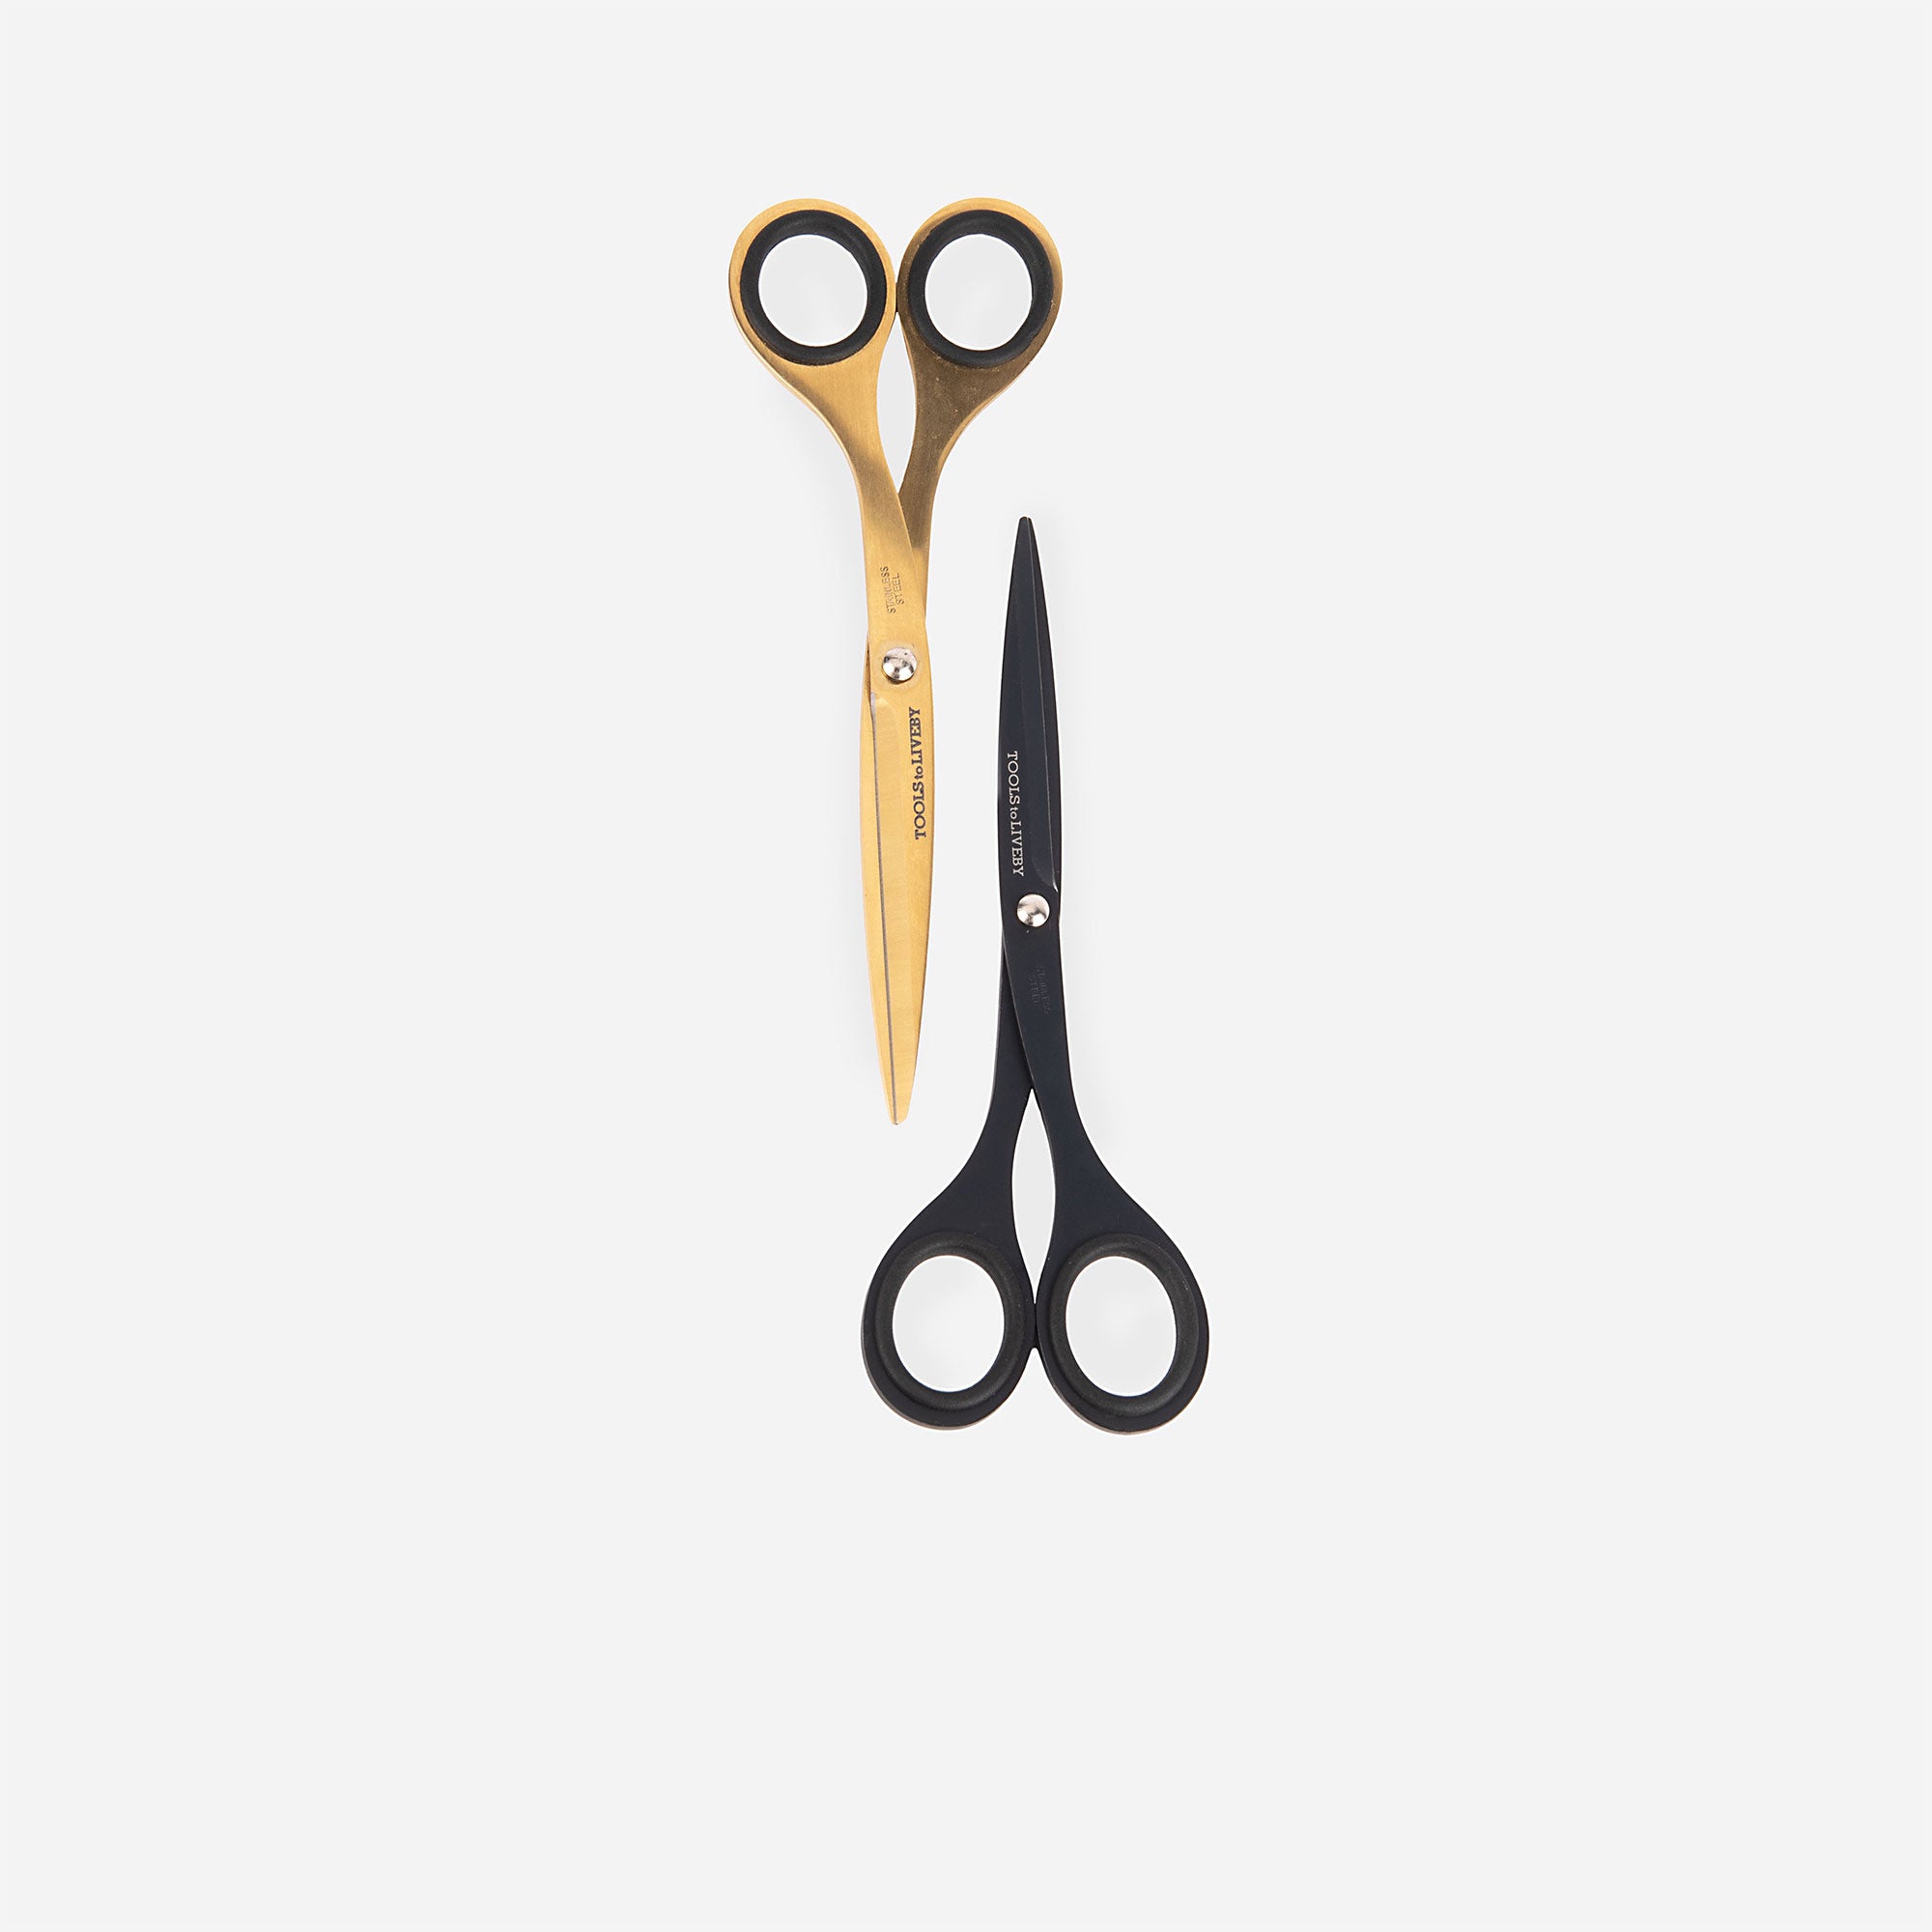 Tools to Liveby Gold Scissors 8 - Made From Japanese Stainless